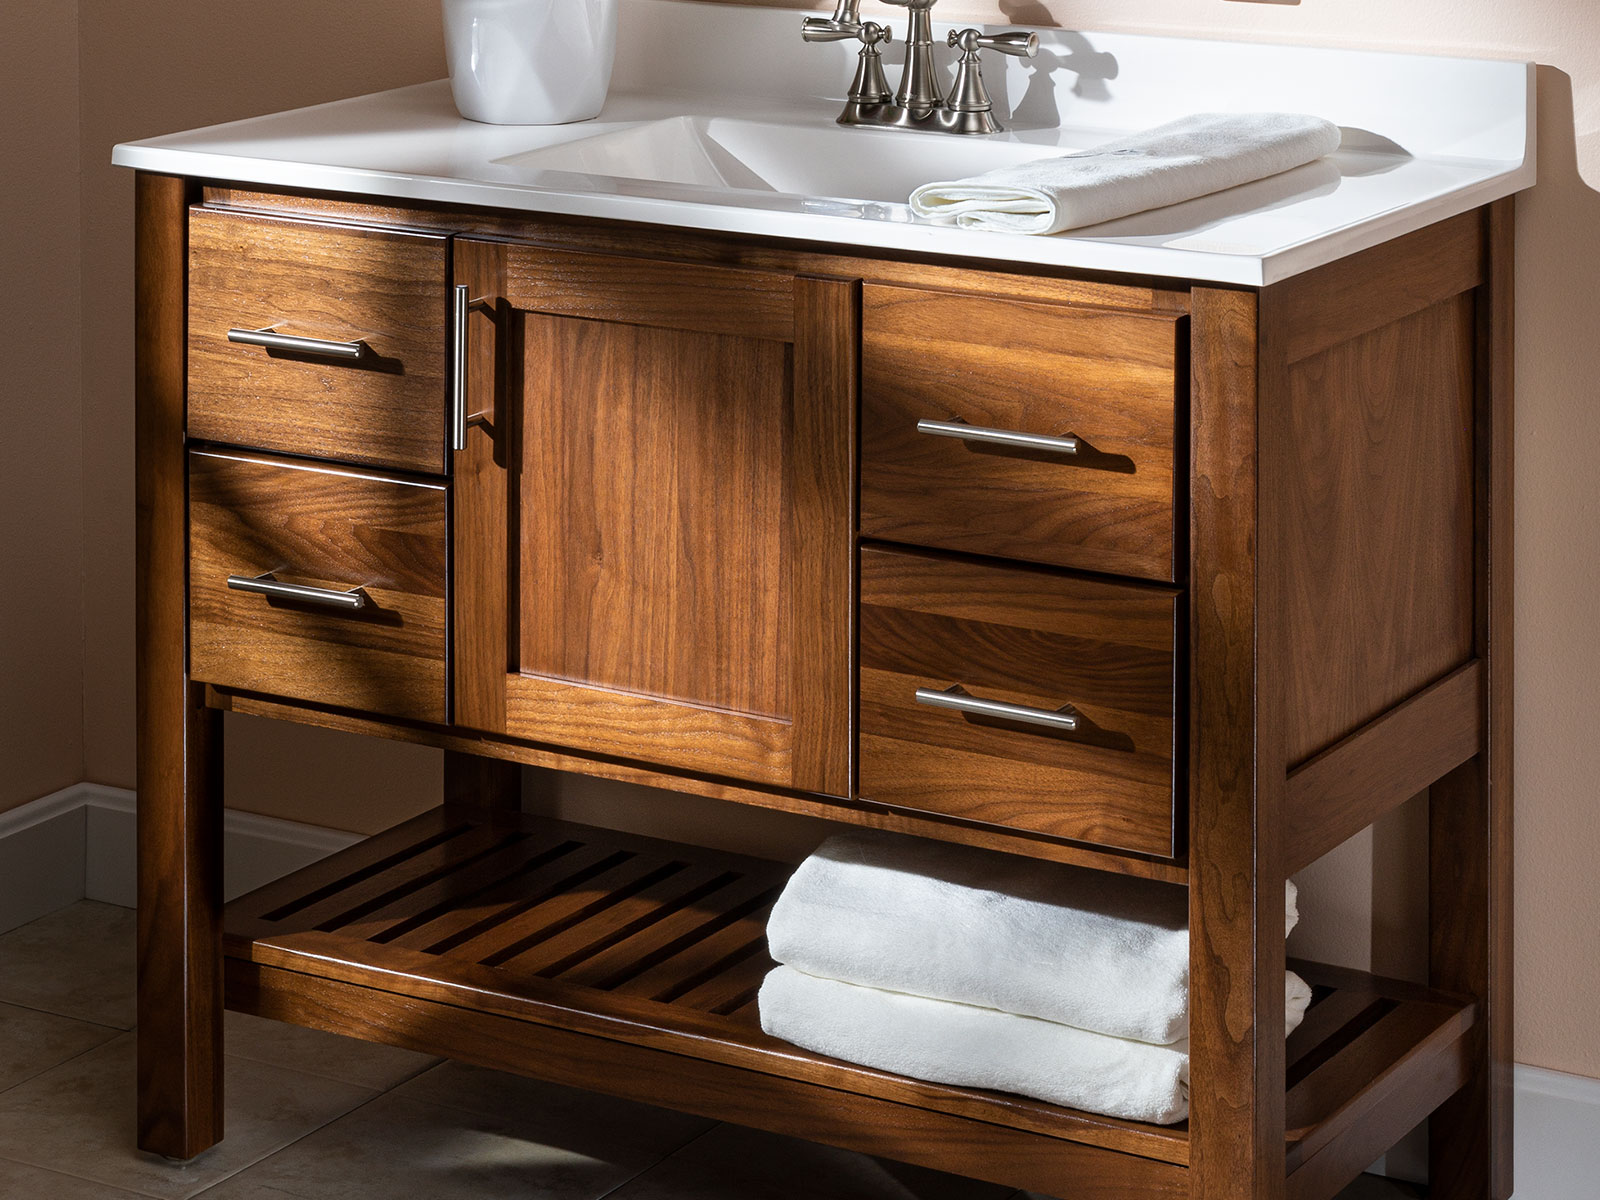 bath vanities and bath cabinetry - bertch cabinets